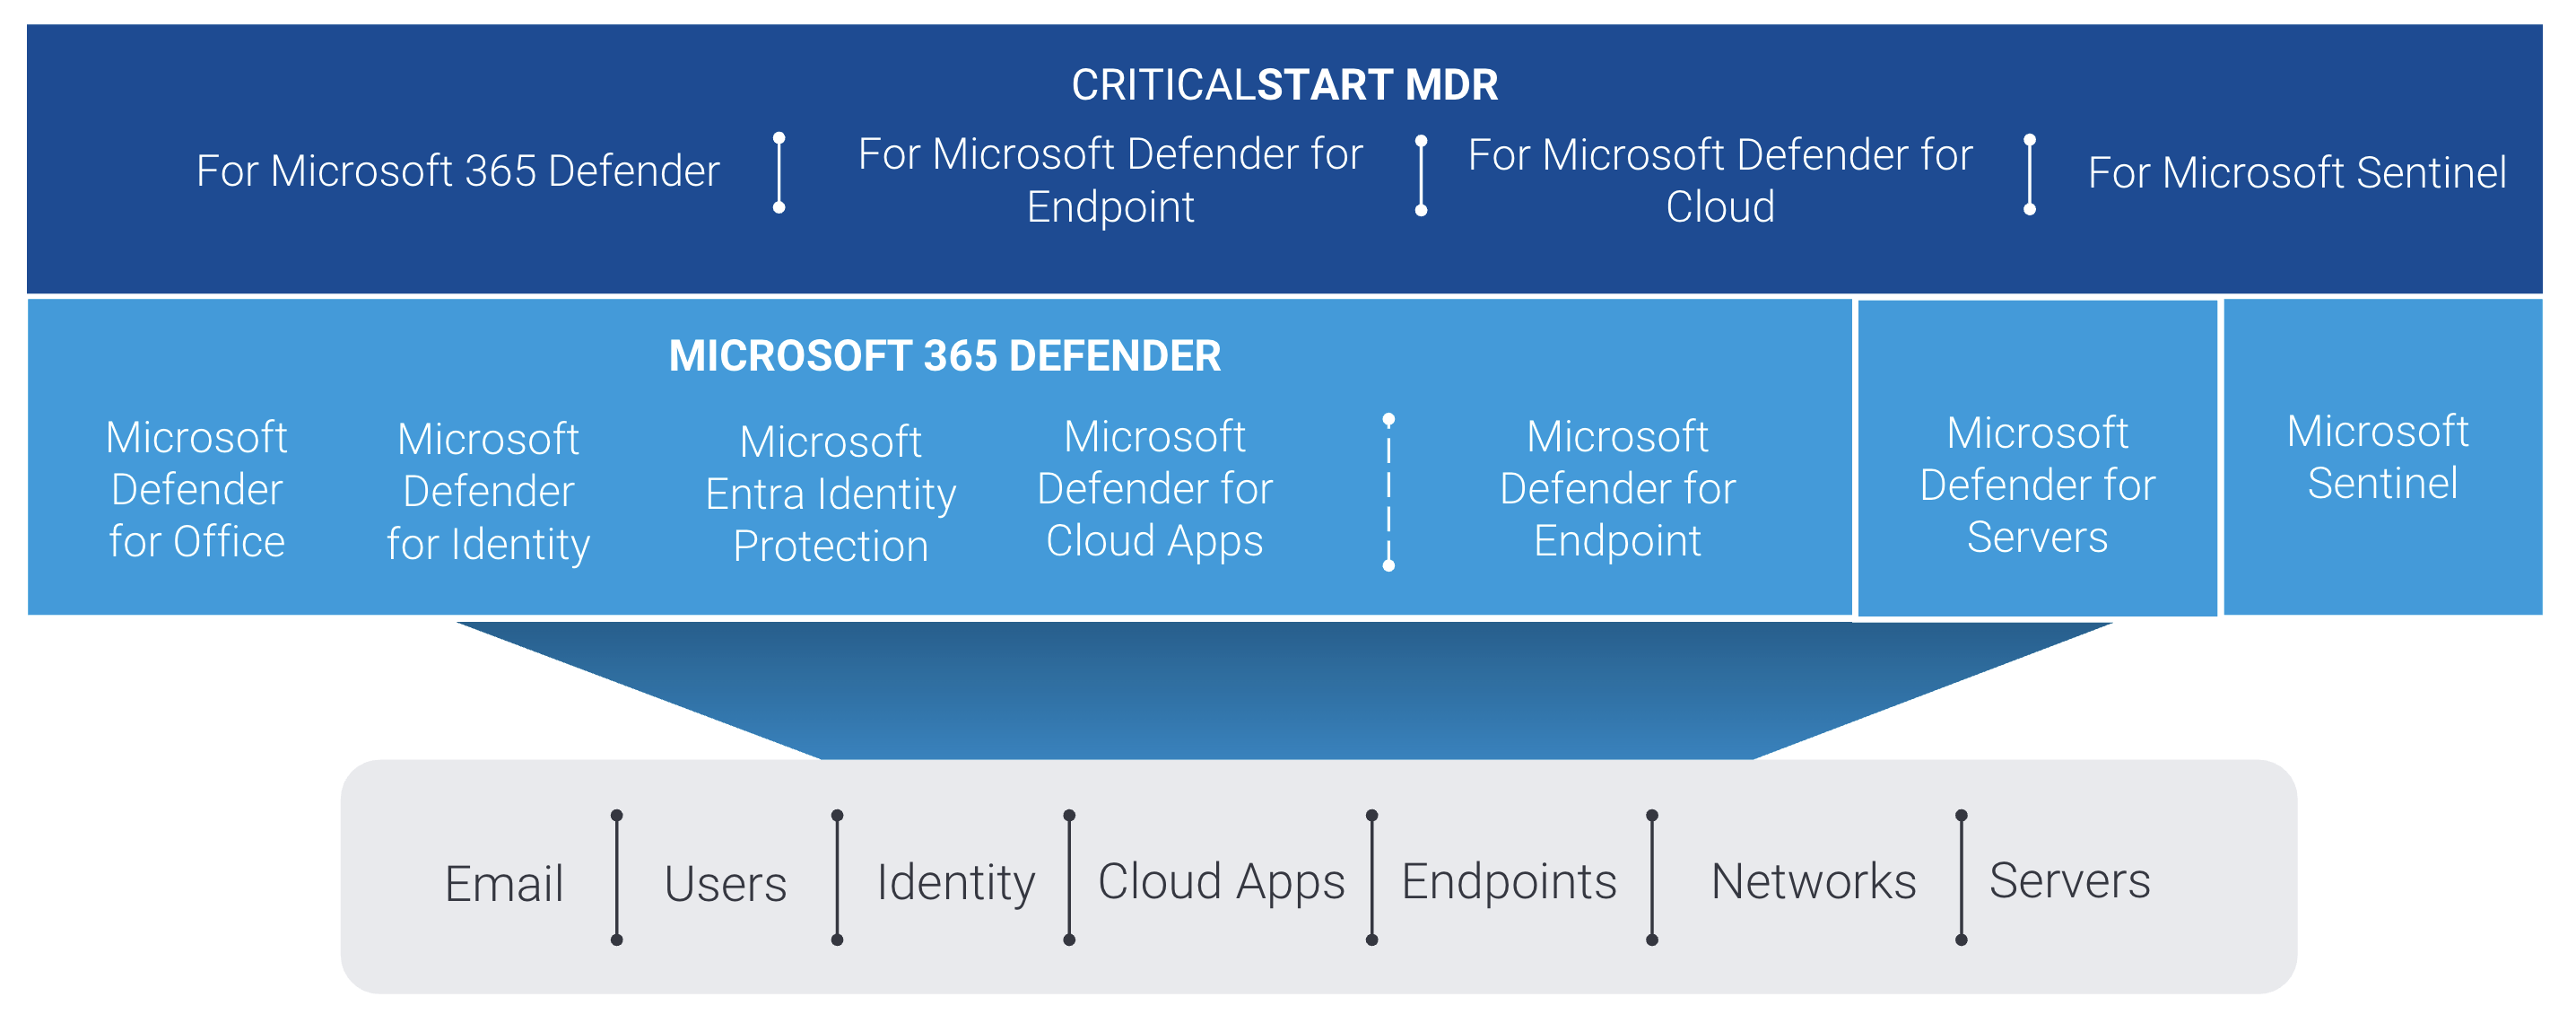 Critical Start and the Microsoft Security Ecosystem